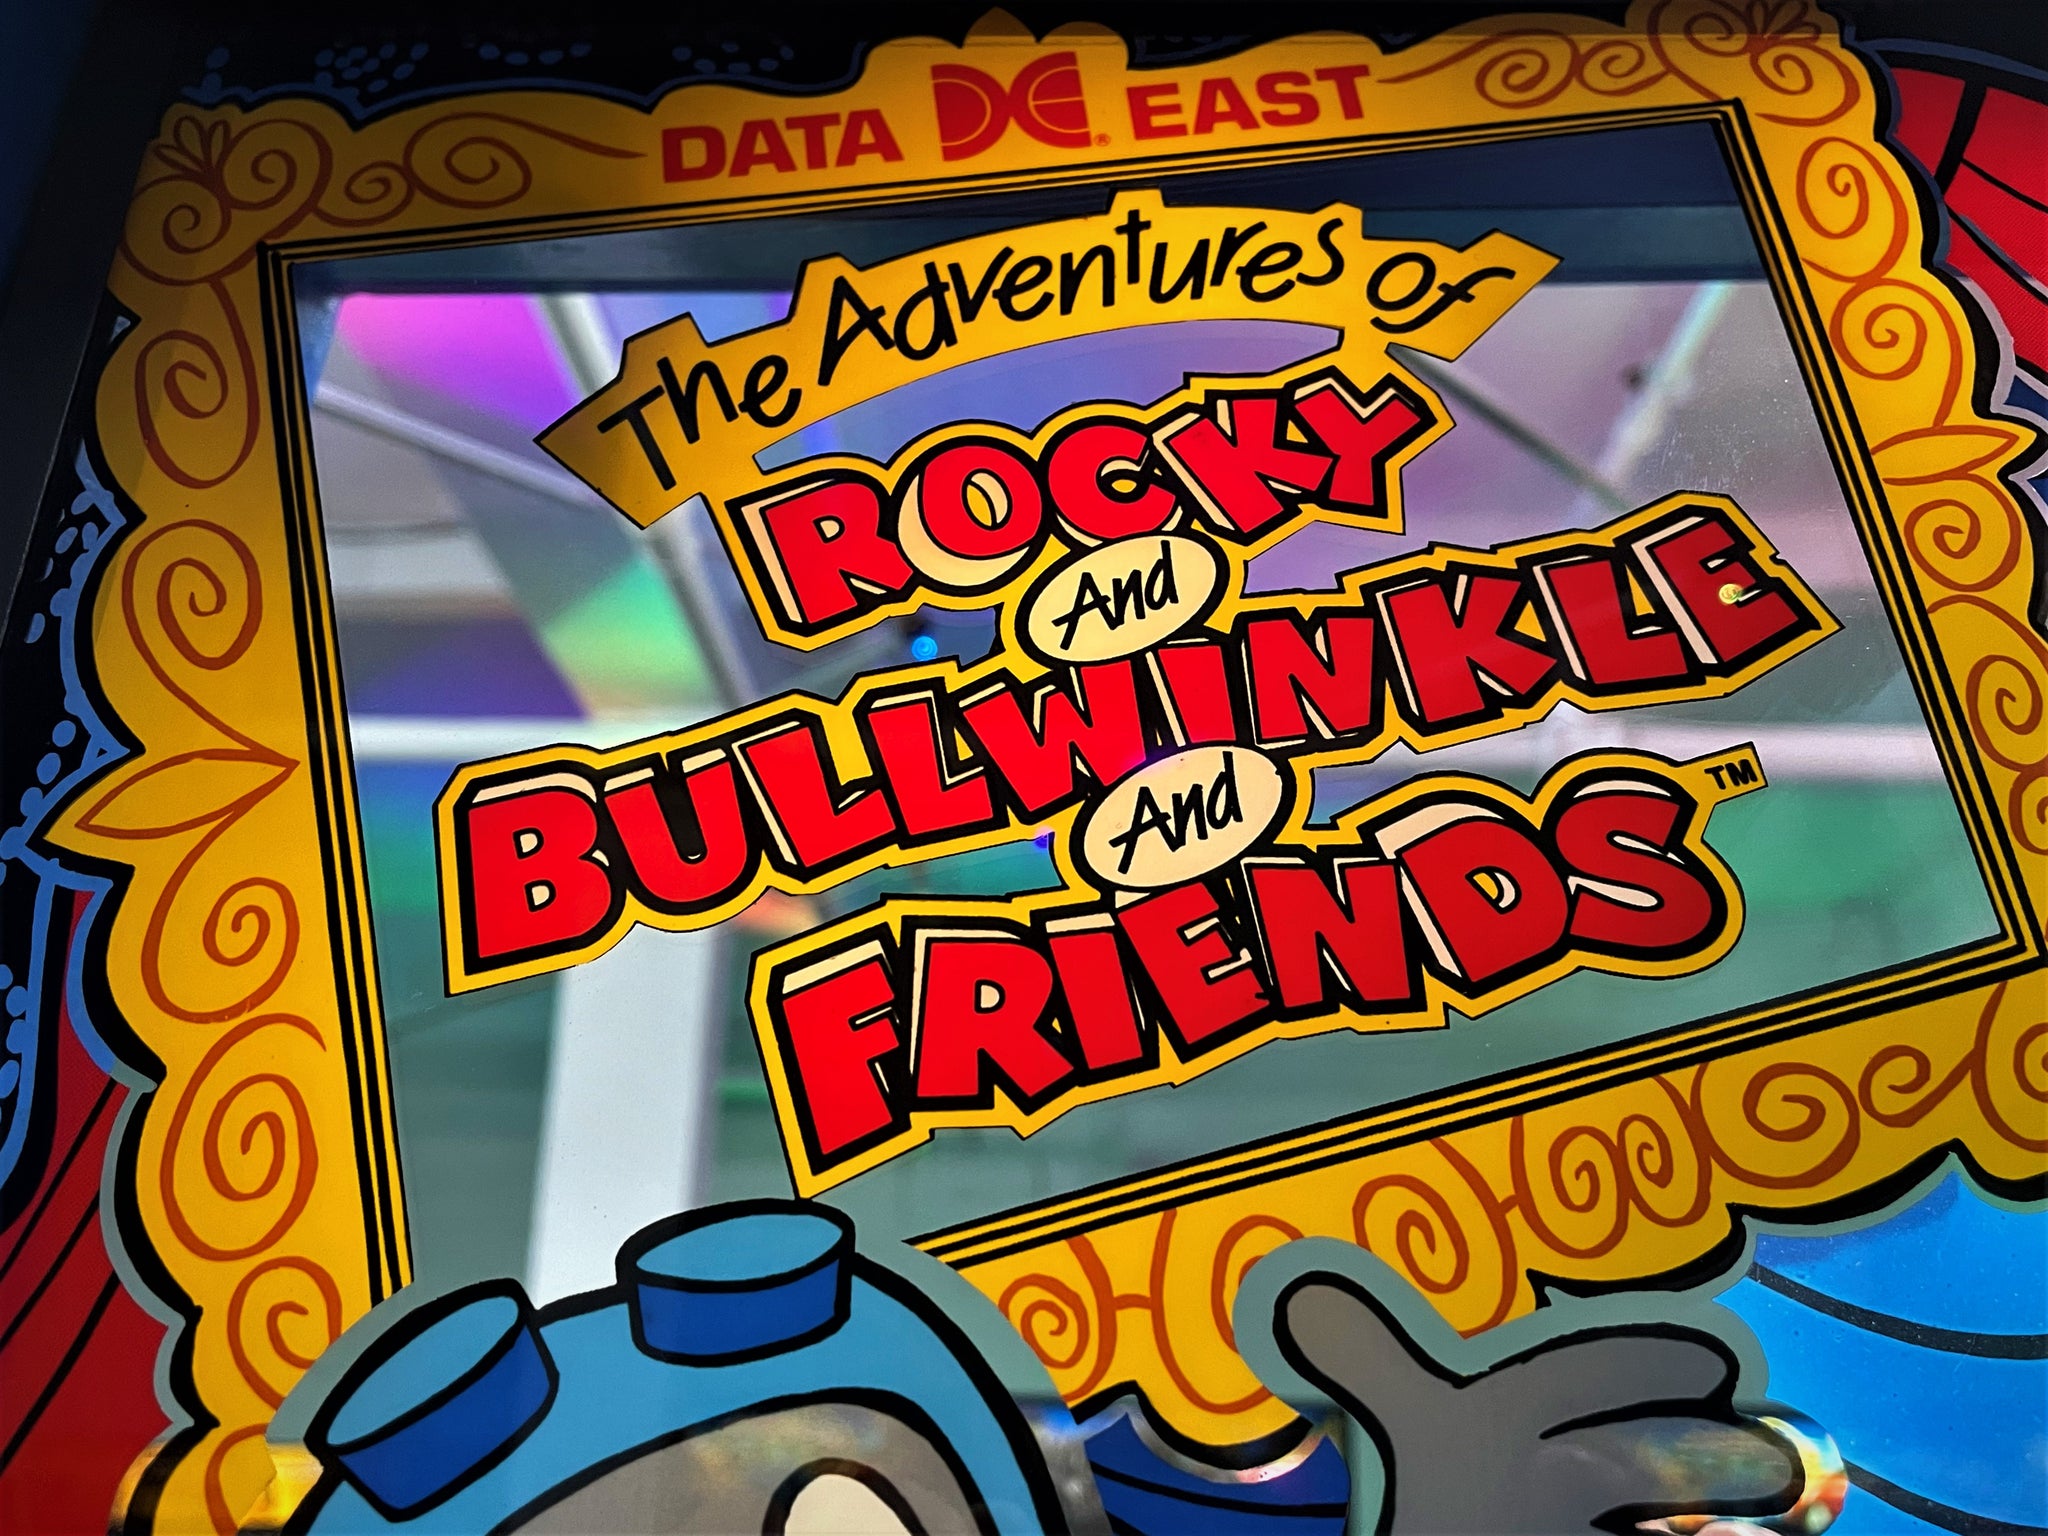 Adventures of Rocky and Bullwinkle and Friends